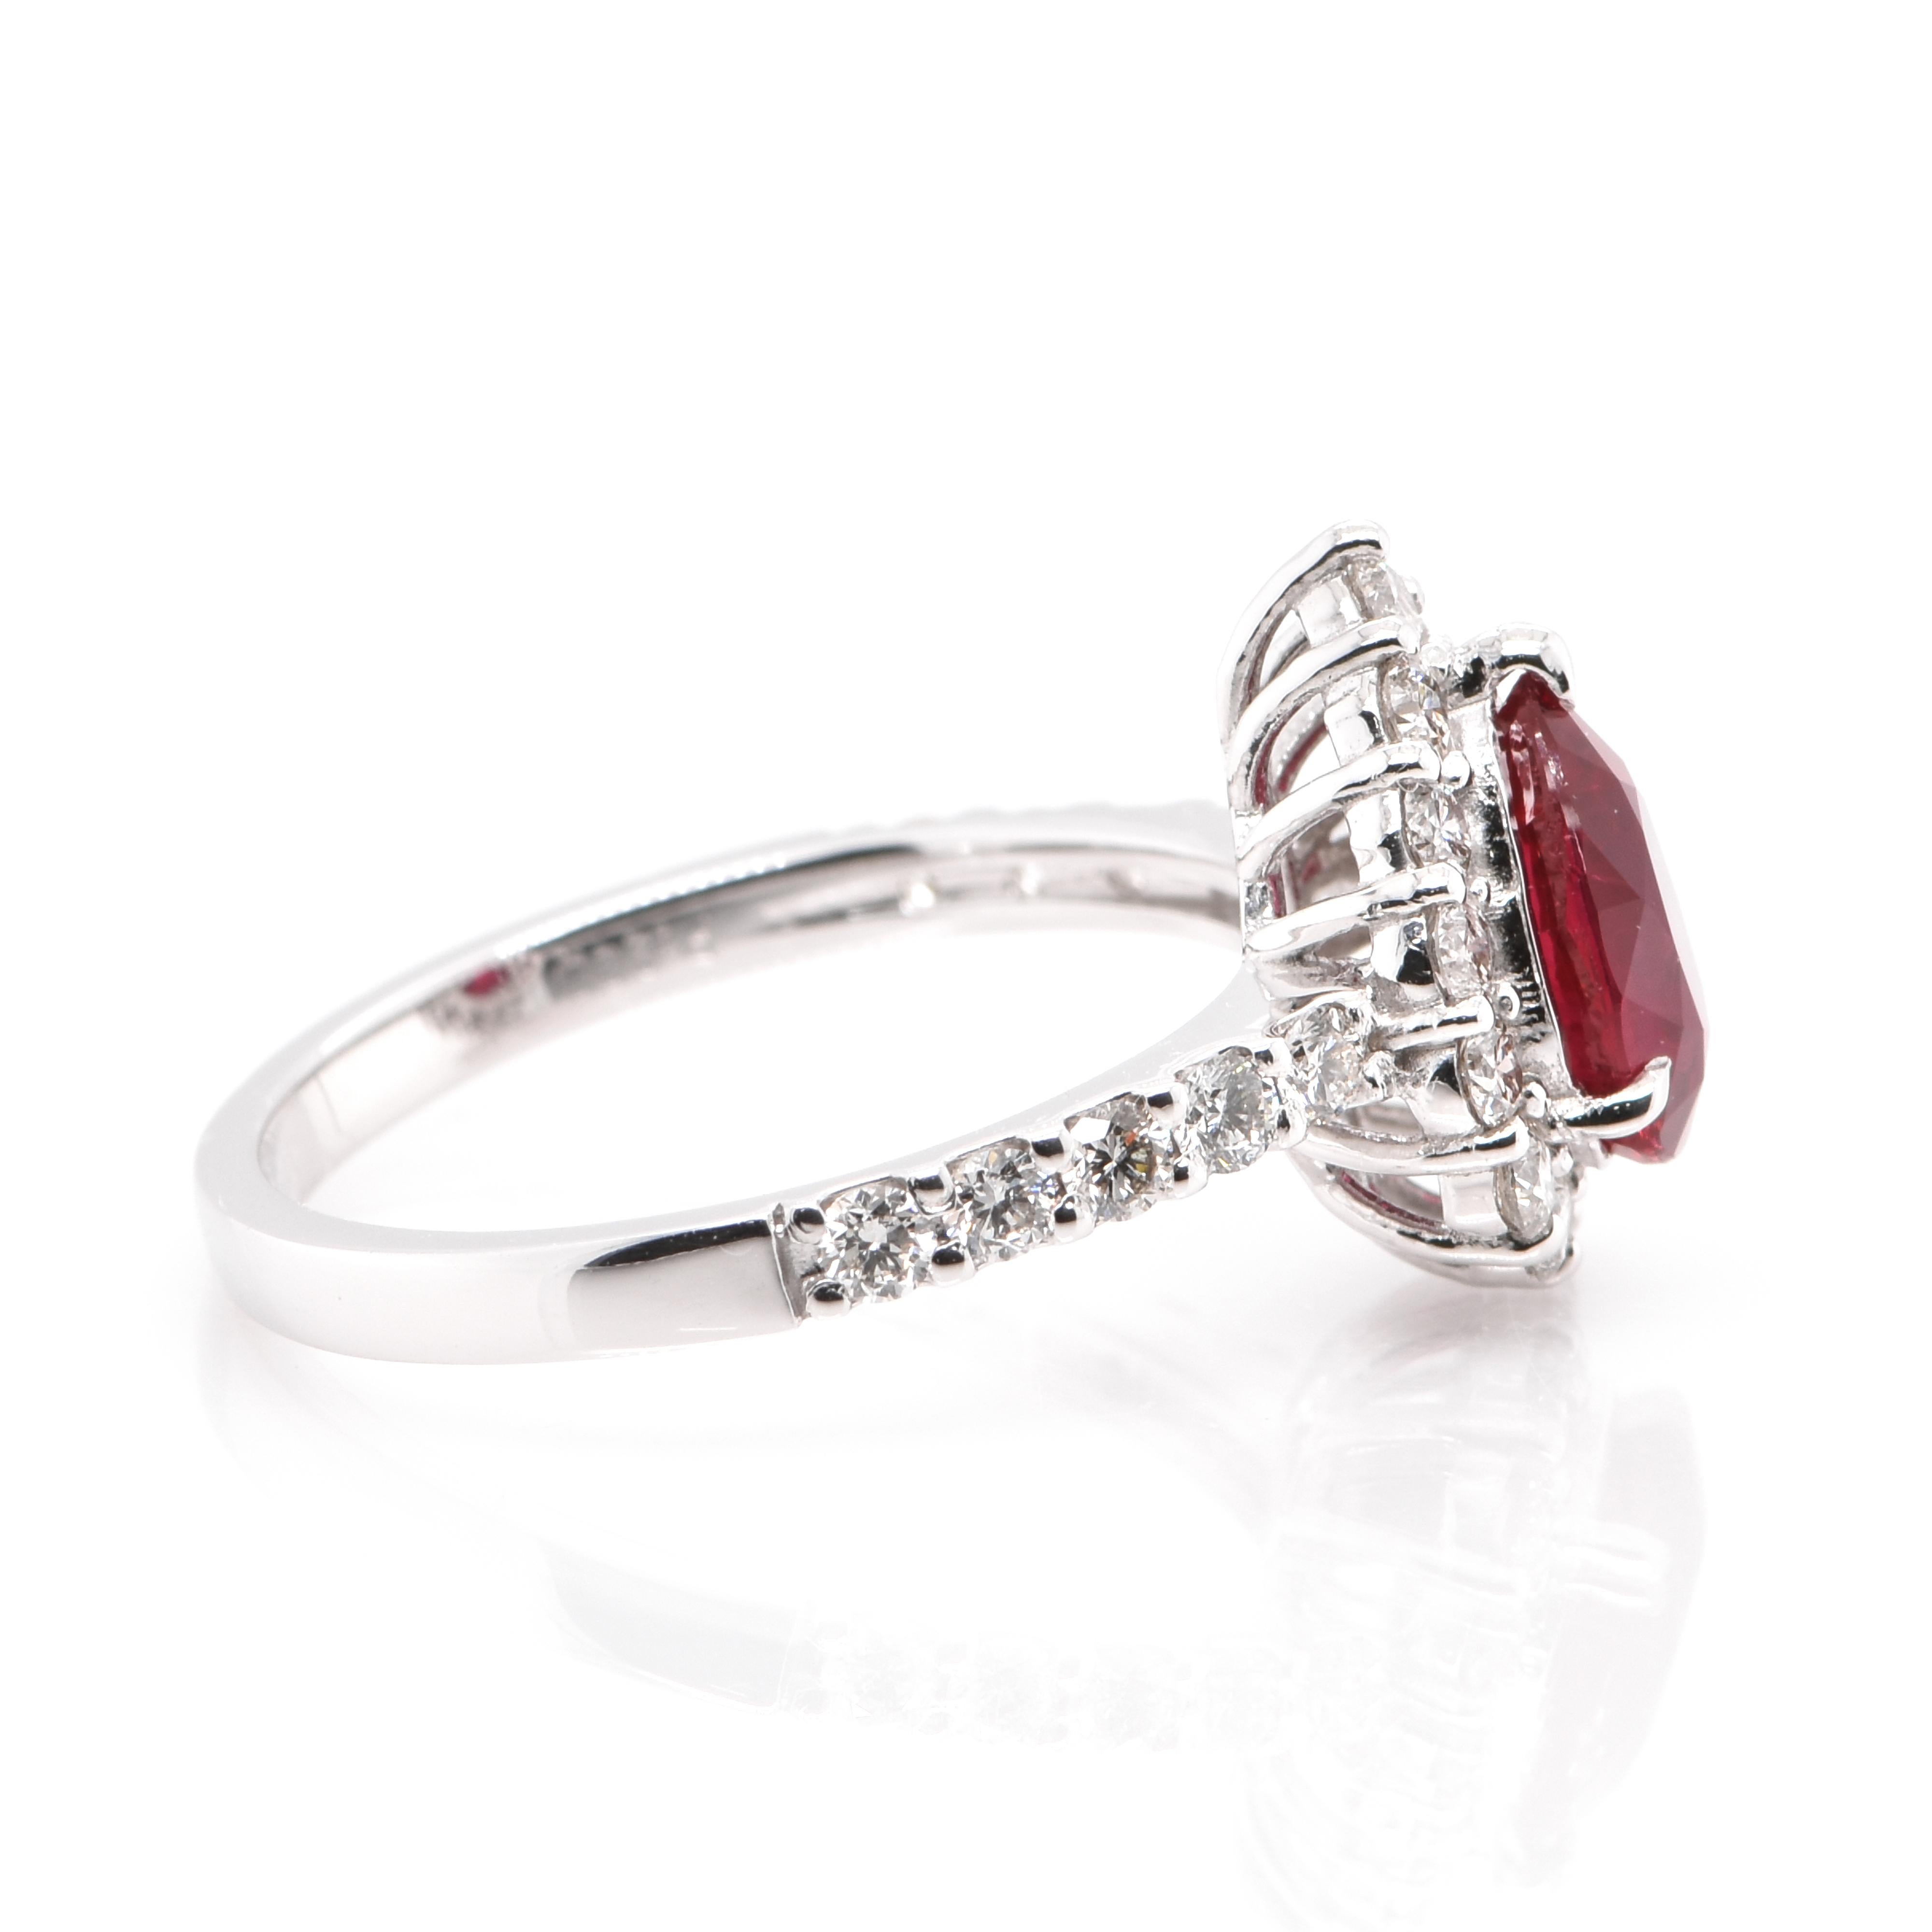 Pear Cut GIA Certified 1.37 Carat Natural Pigeon's Blood Color Ruby Ring set in Platinum